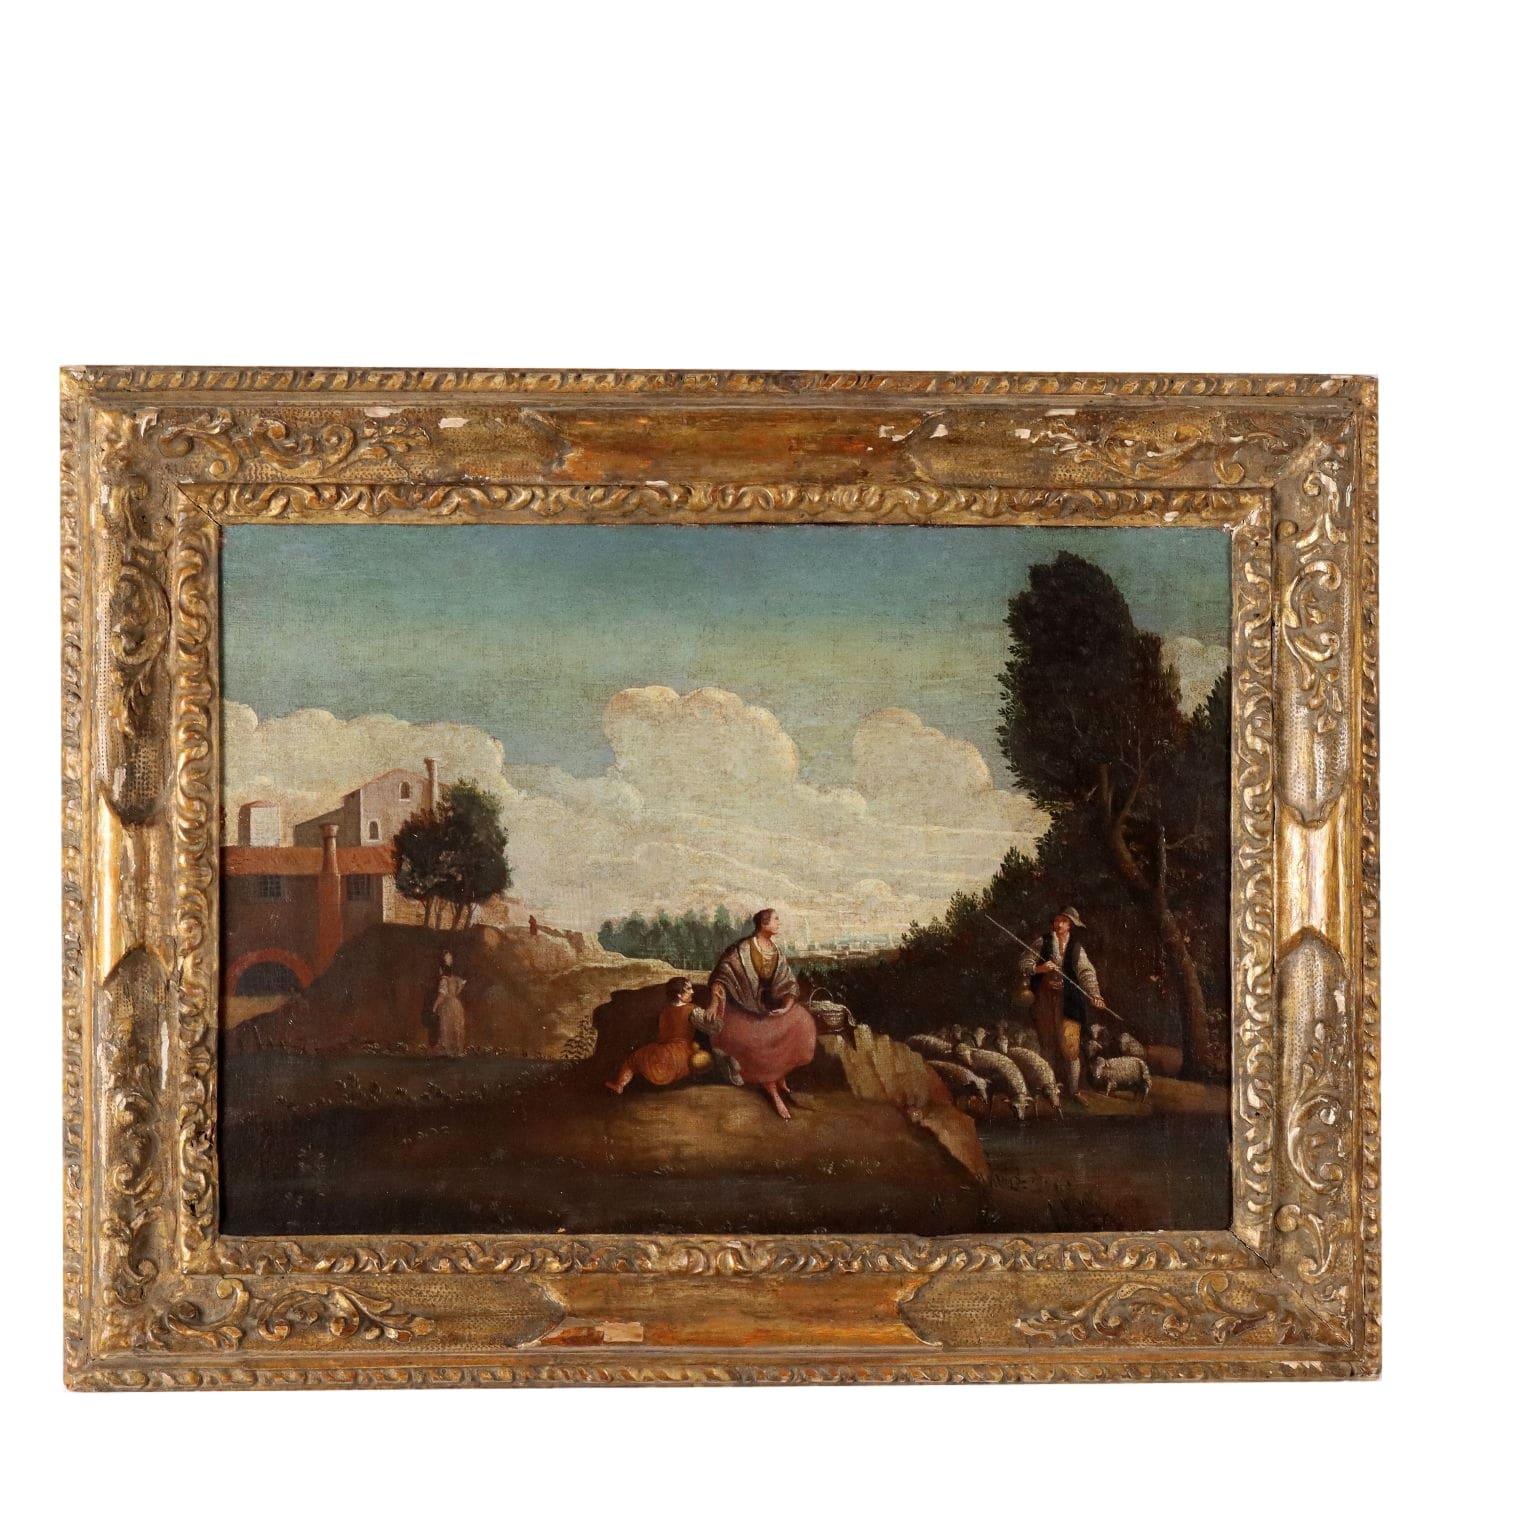 Oil on Canvas.
Of flavor  bucolic and serene, the scene set in the countryside on the edge of the hamlet that can be glimpsed on the left shows a woman and her son standing near a stream,  they wait with a lunch basket for the shepherd with his